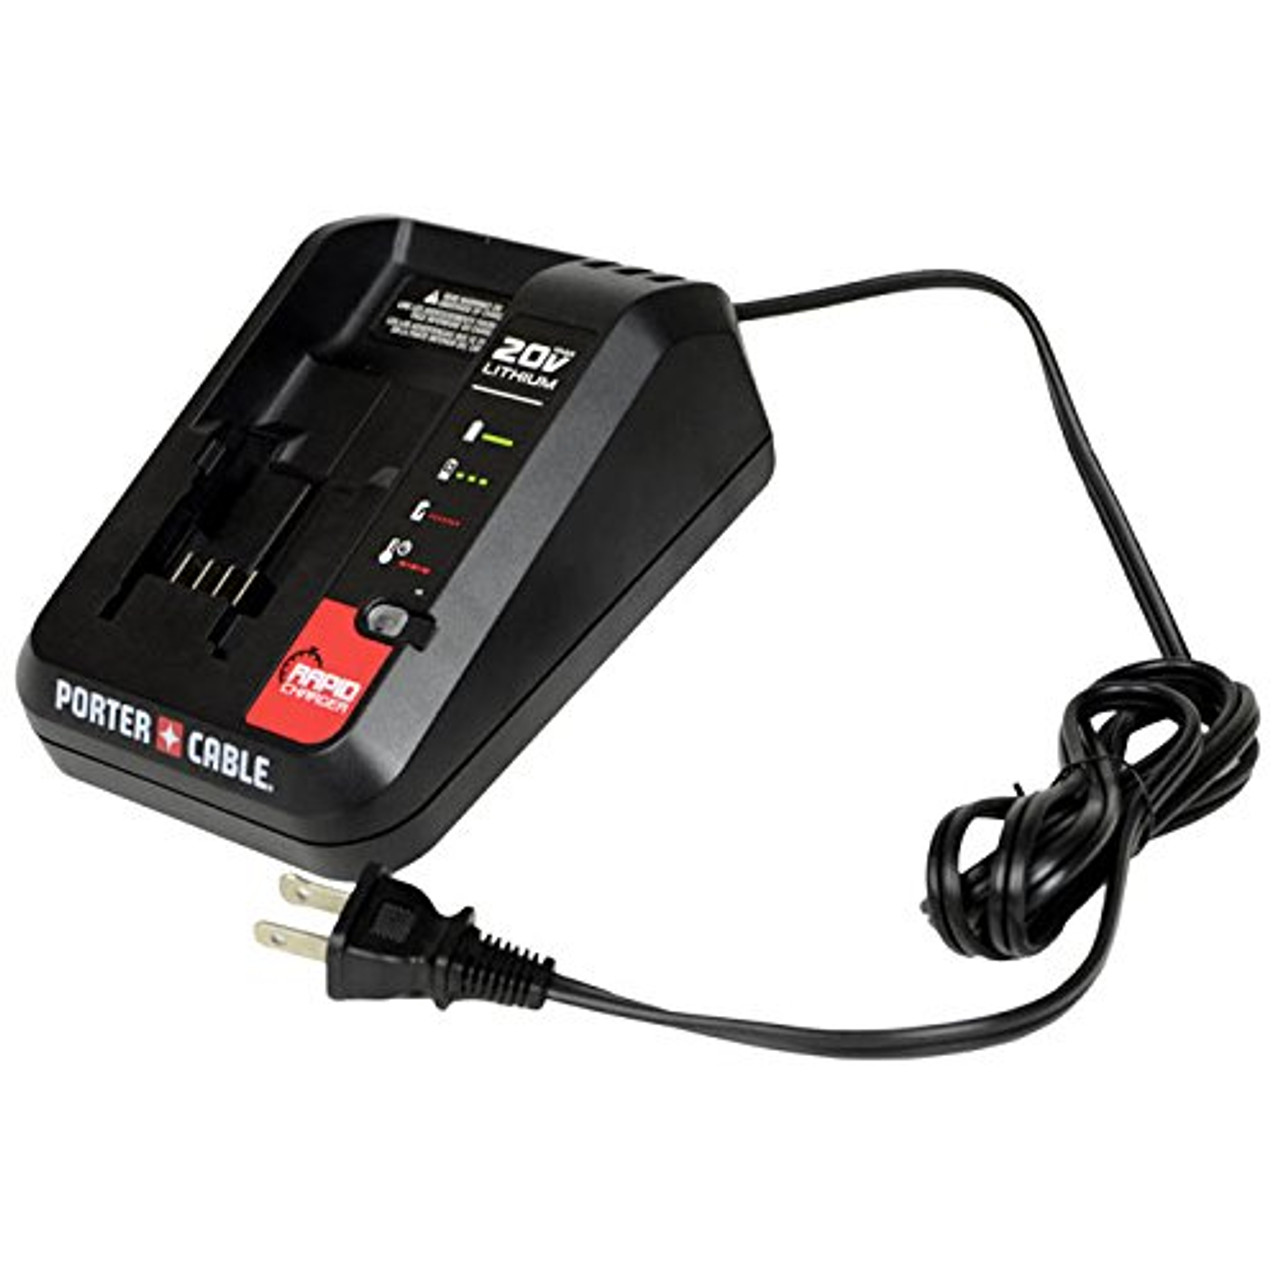 Porter Cable 20V Lithium Battery Charger